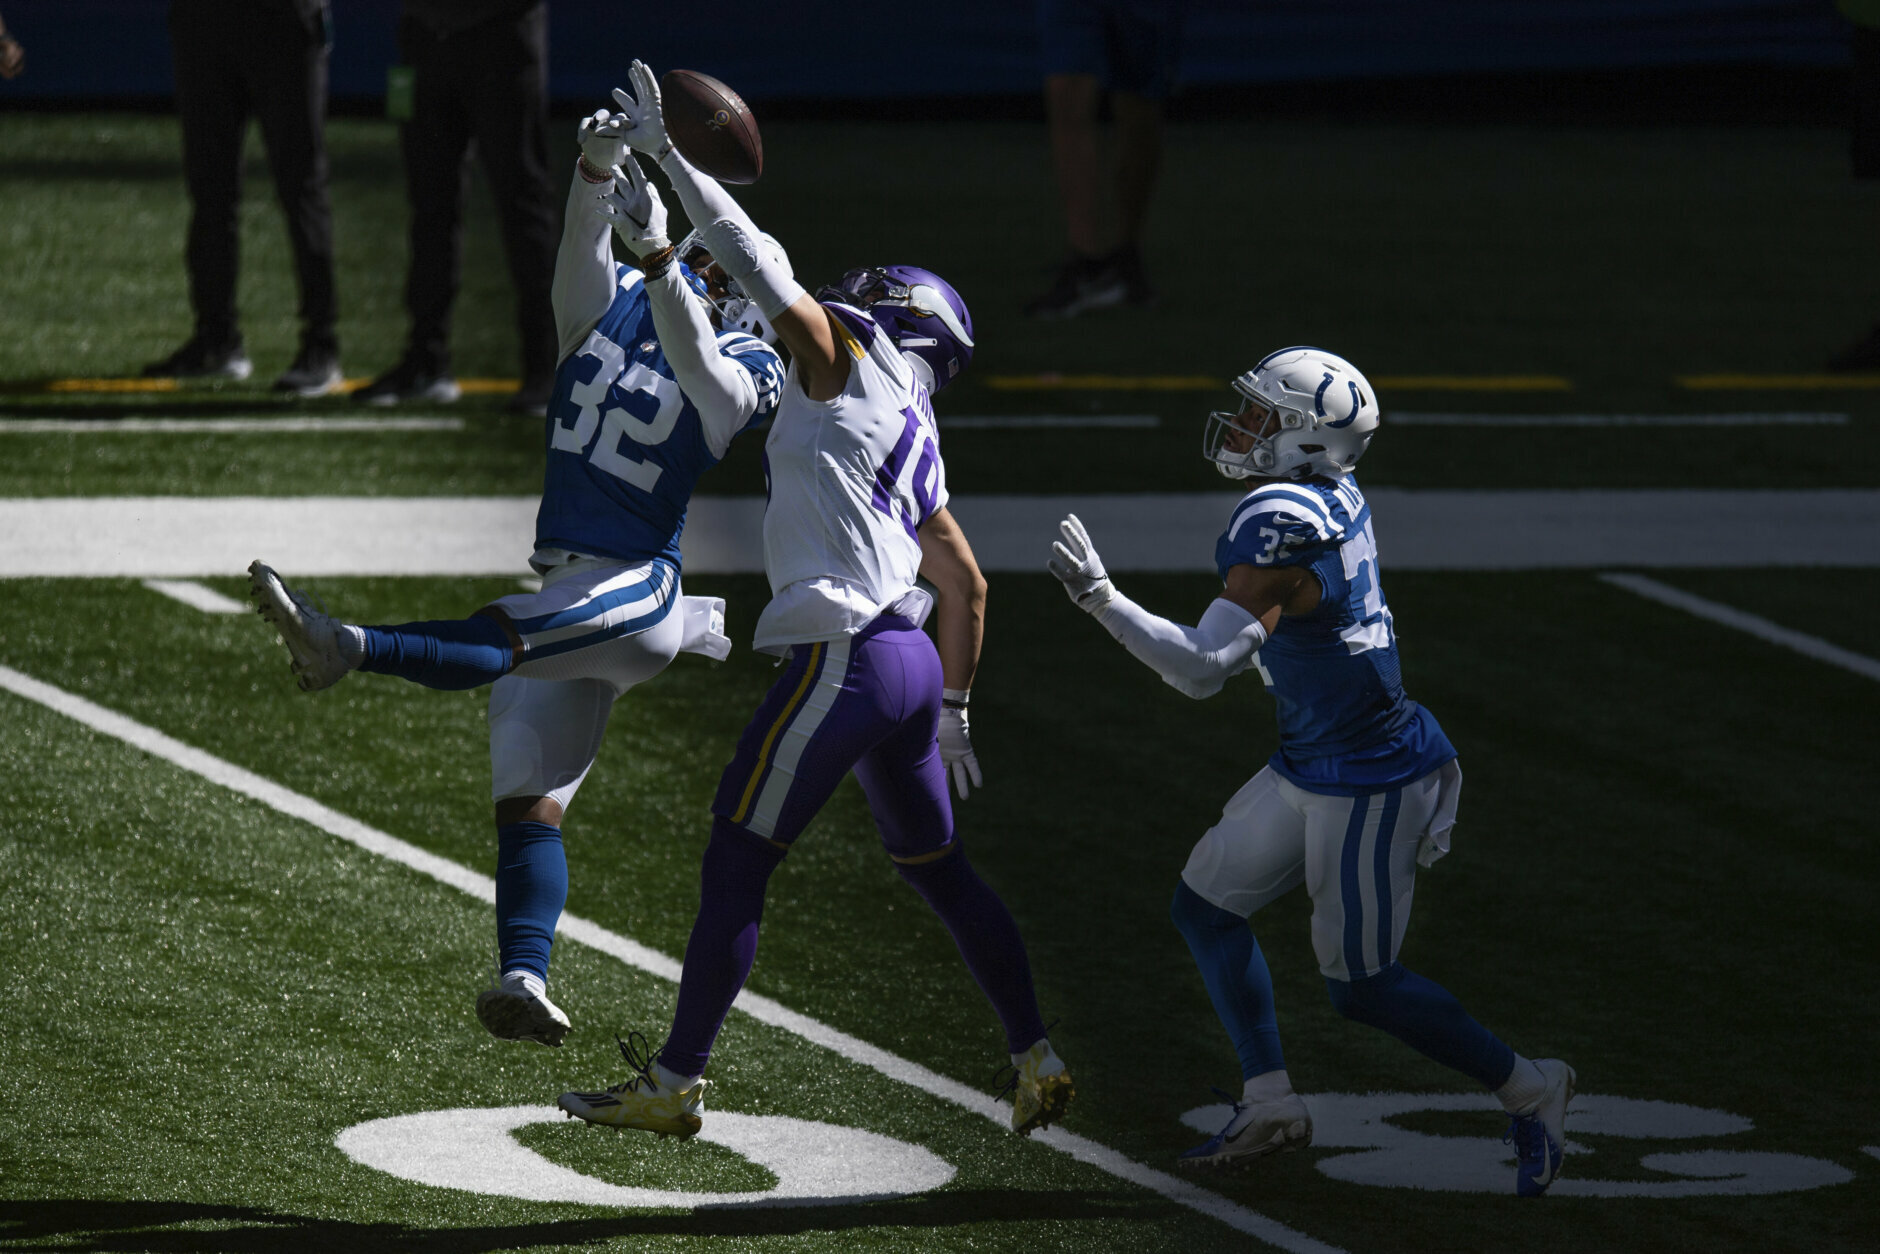 <p><b><i>Vikings 11</i></b><br />
<b><i>Colts 28</i></b></p>
<p>Speaking of Diggs, he individually (eight catches for 153 yards and a touchdown) outgained his entire former team Sunday, as the 0-2 Vikings generated just 95 yards through the air in Indianapolis.</p>
<p>Remember how I said in my NFL Preview that <a href="https://wtop.com/nfl/2020/09/2020-nfc-north-preview/">Minnesota looks good on paper but will find a way to lose</a>? Well, it&#8217;s going to be a long season in Minnesota.</p>
